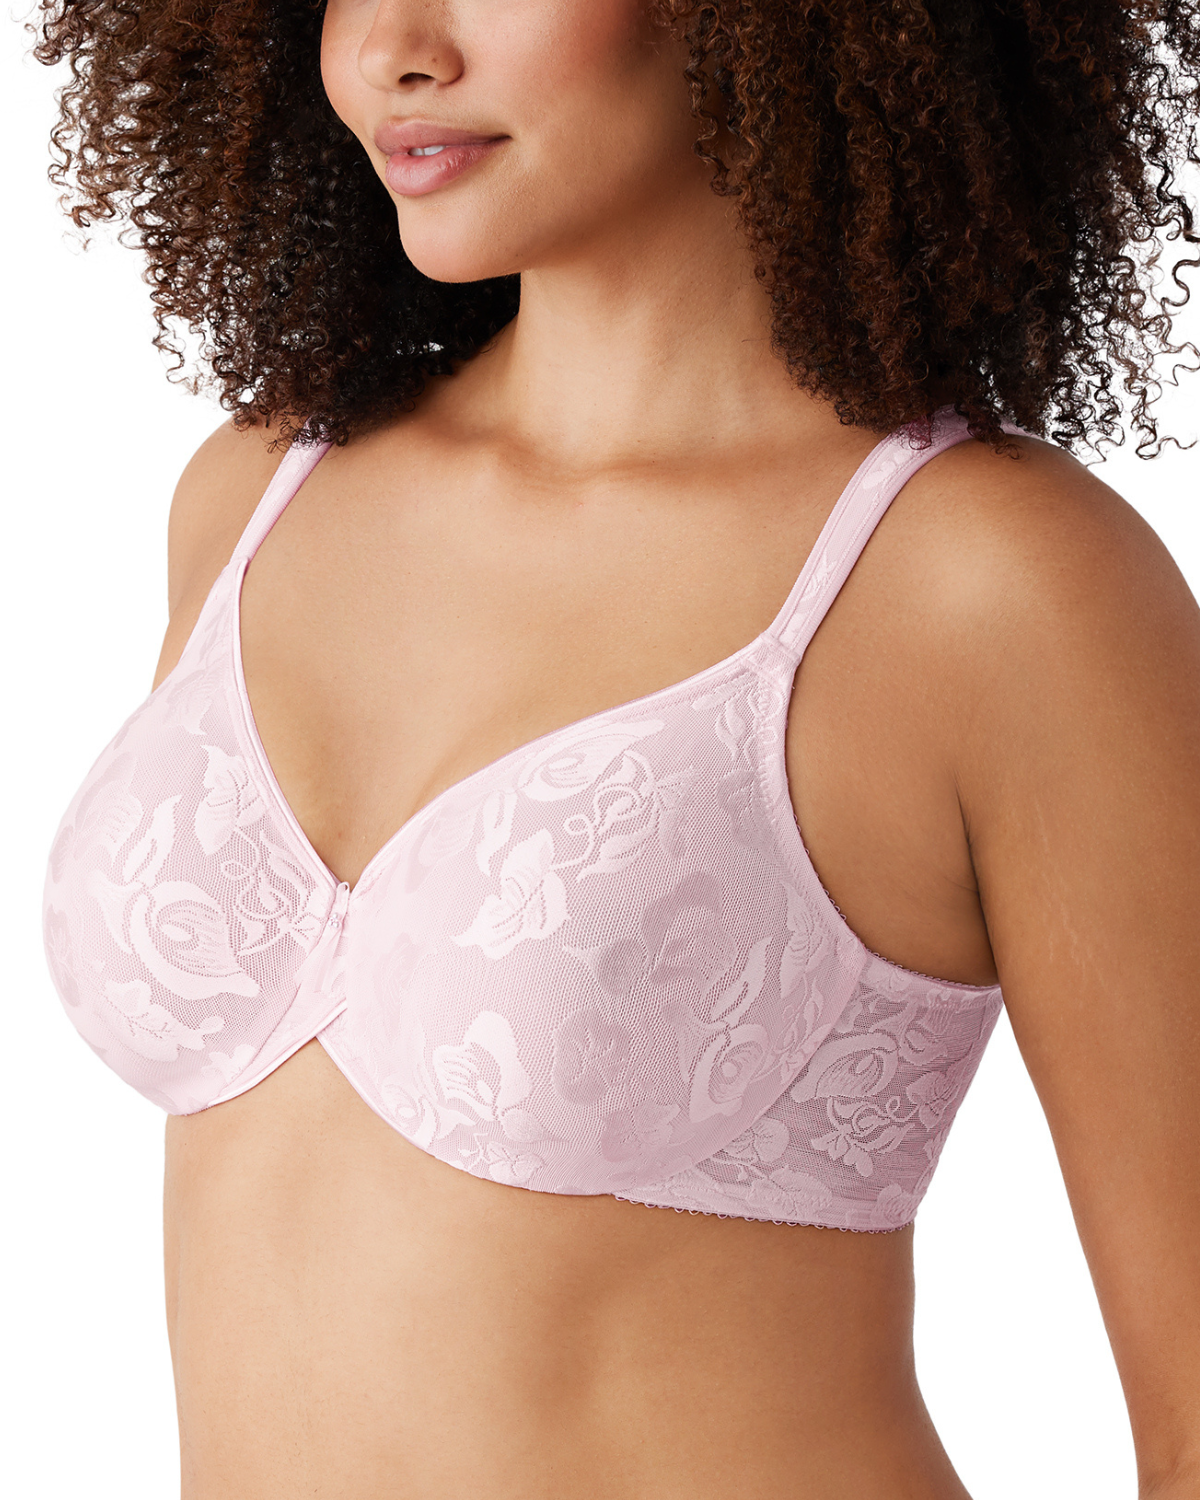 Wacoal Awareness Underwire Bra (More colors available) - 85567 - Chalk Pink